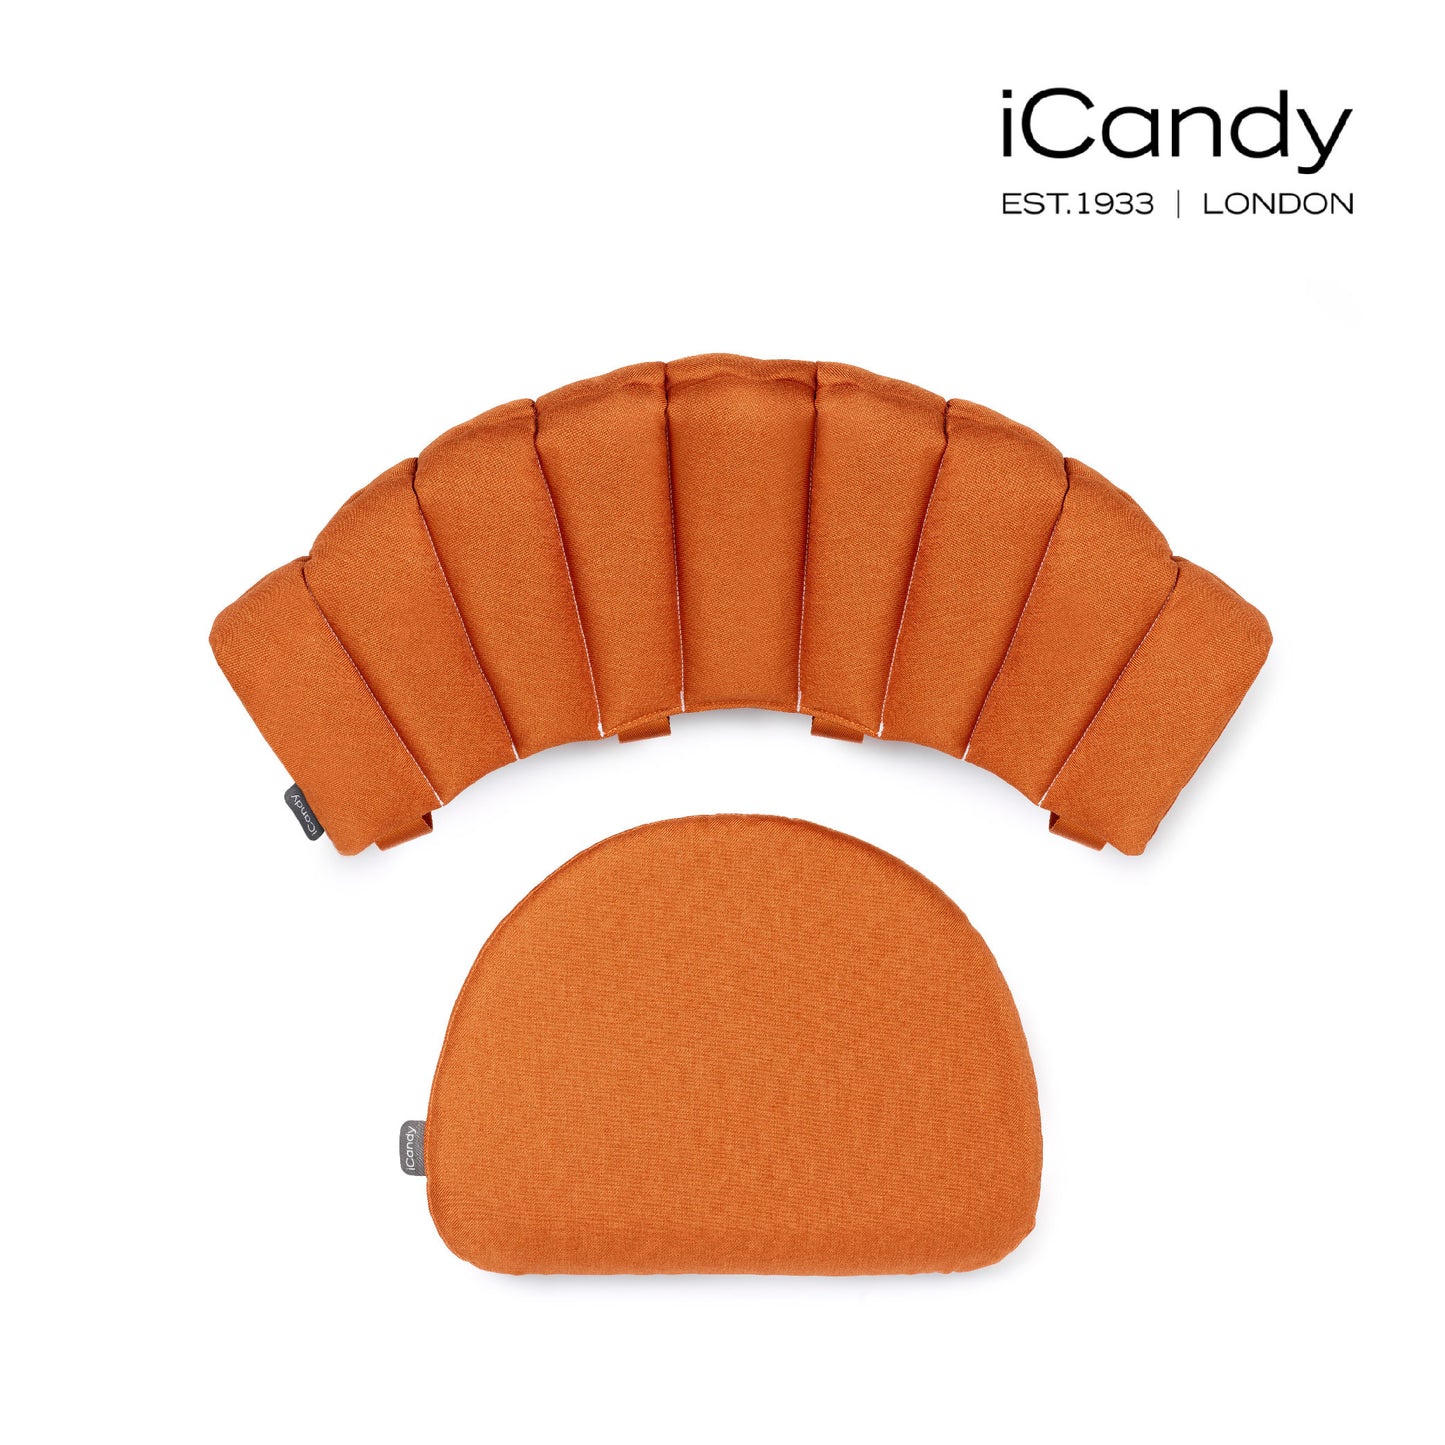 【iCandy】MiChair Fashionable Children's Multifunctional Growing Dining Chair/Chair Cushion - 3 Colors Available